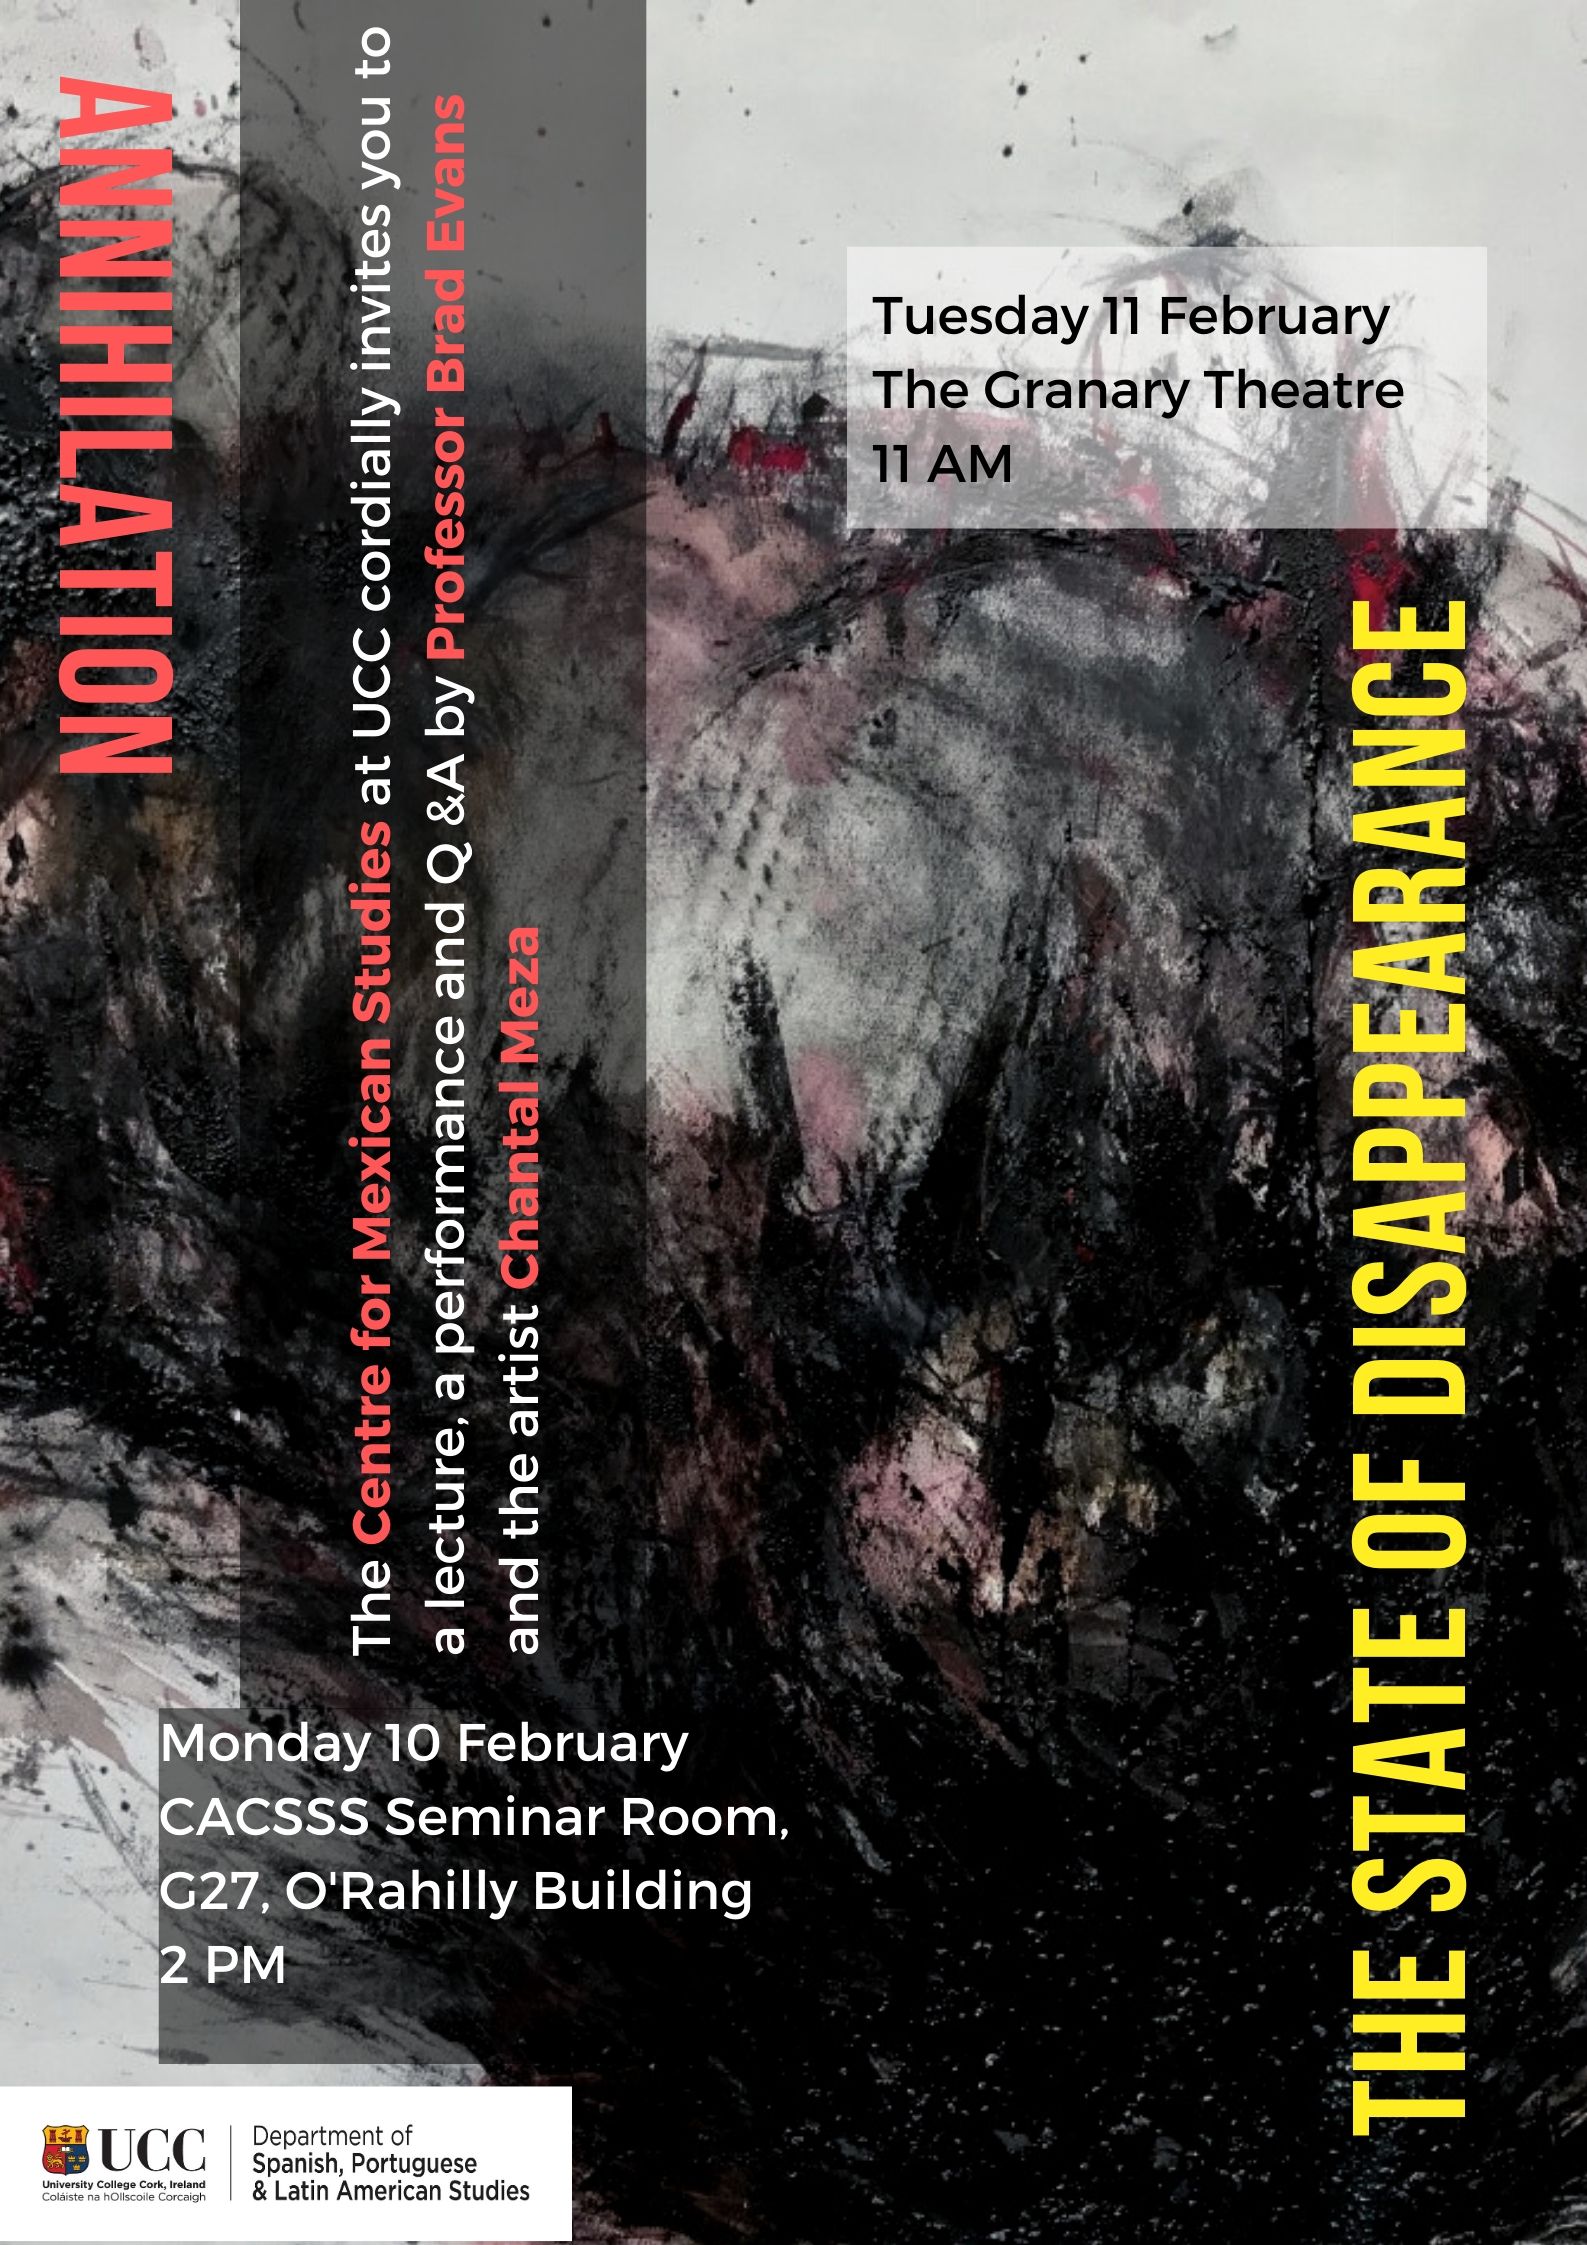 Annihilation and The State of Extinction. A Lecture, Performance and Q&A by Professor Brad Evans and Chantal Meza-10-11 February 2020